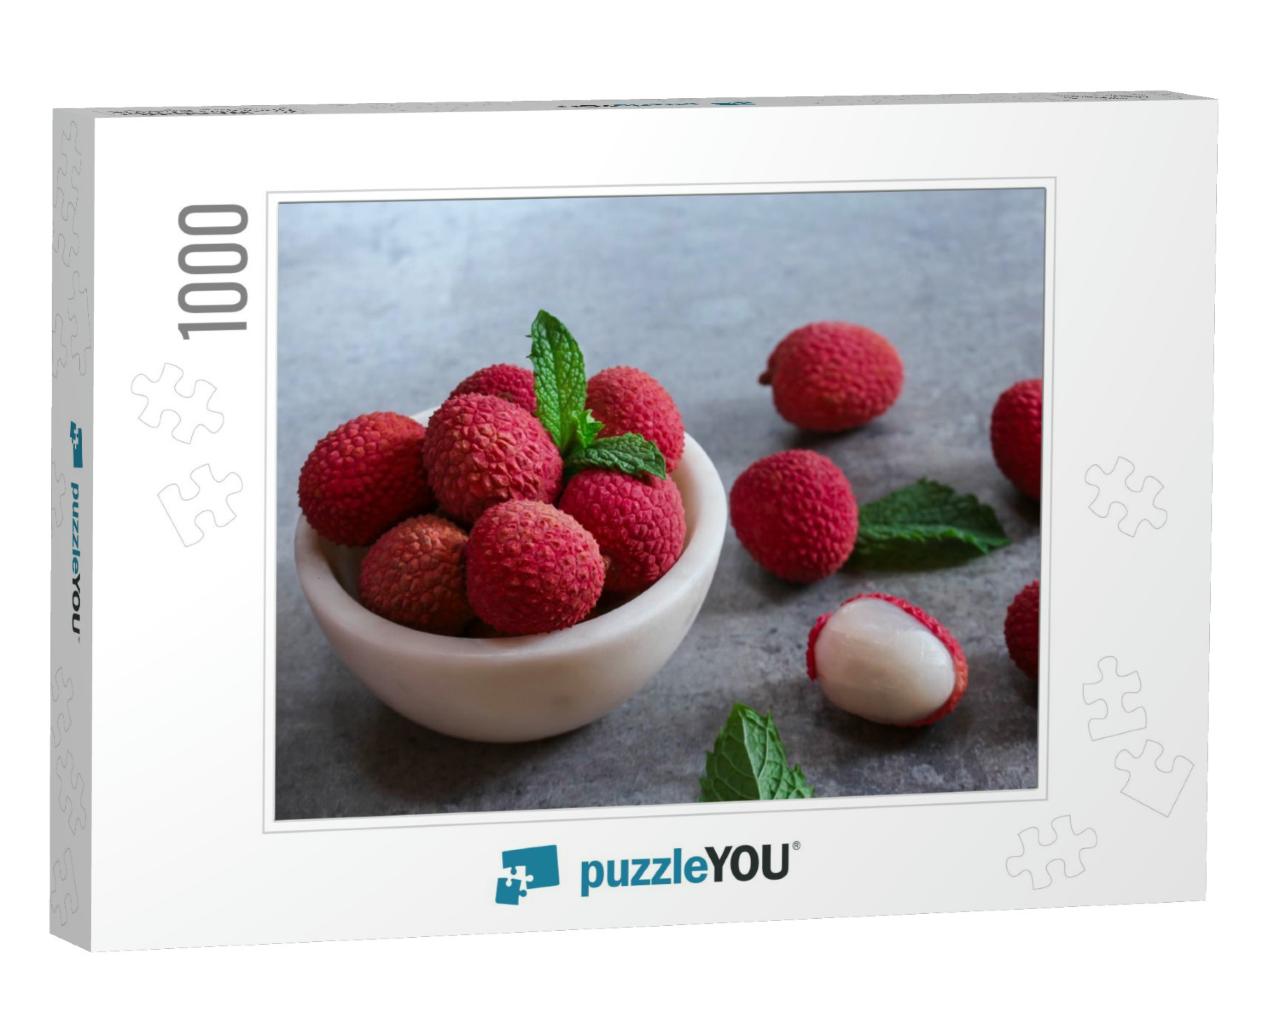 Fresh Lychee Fruits/ Litchi Still Life... Jigsaw Puzzle with 1000 pieces